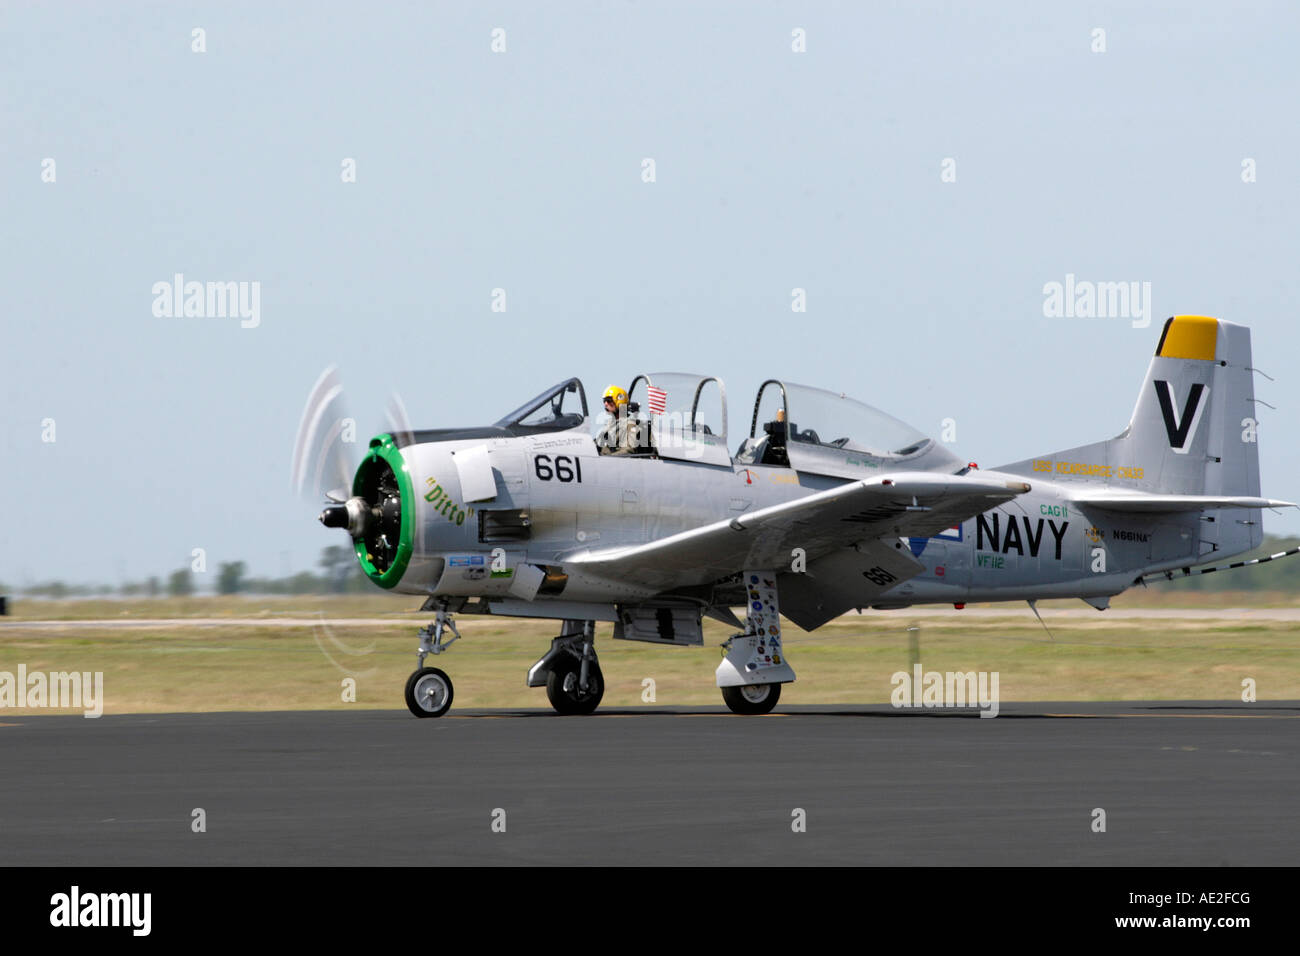 American Prop Driven War Plane Named Ditto on the Taxiway at MacDill Air Force Base in Tampa Florida USA Stock Photo